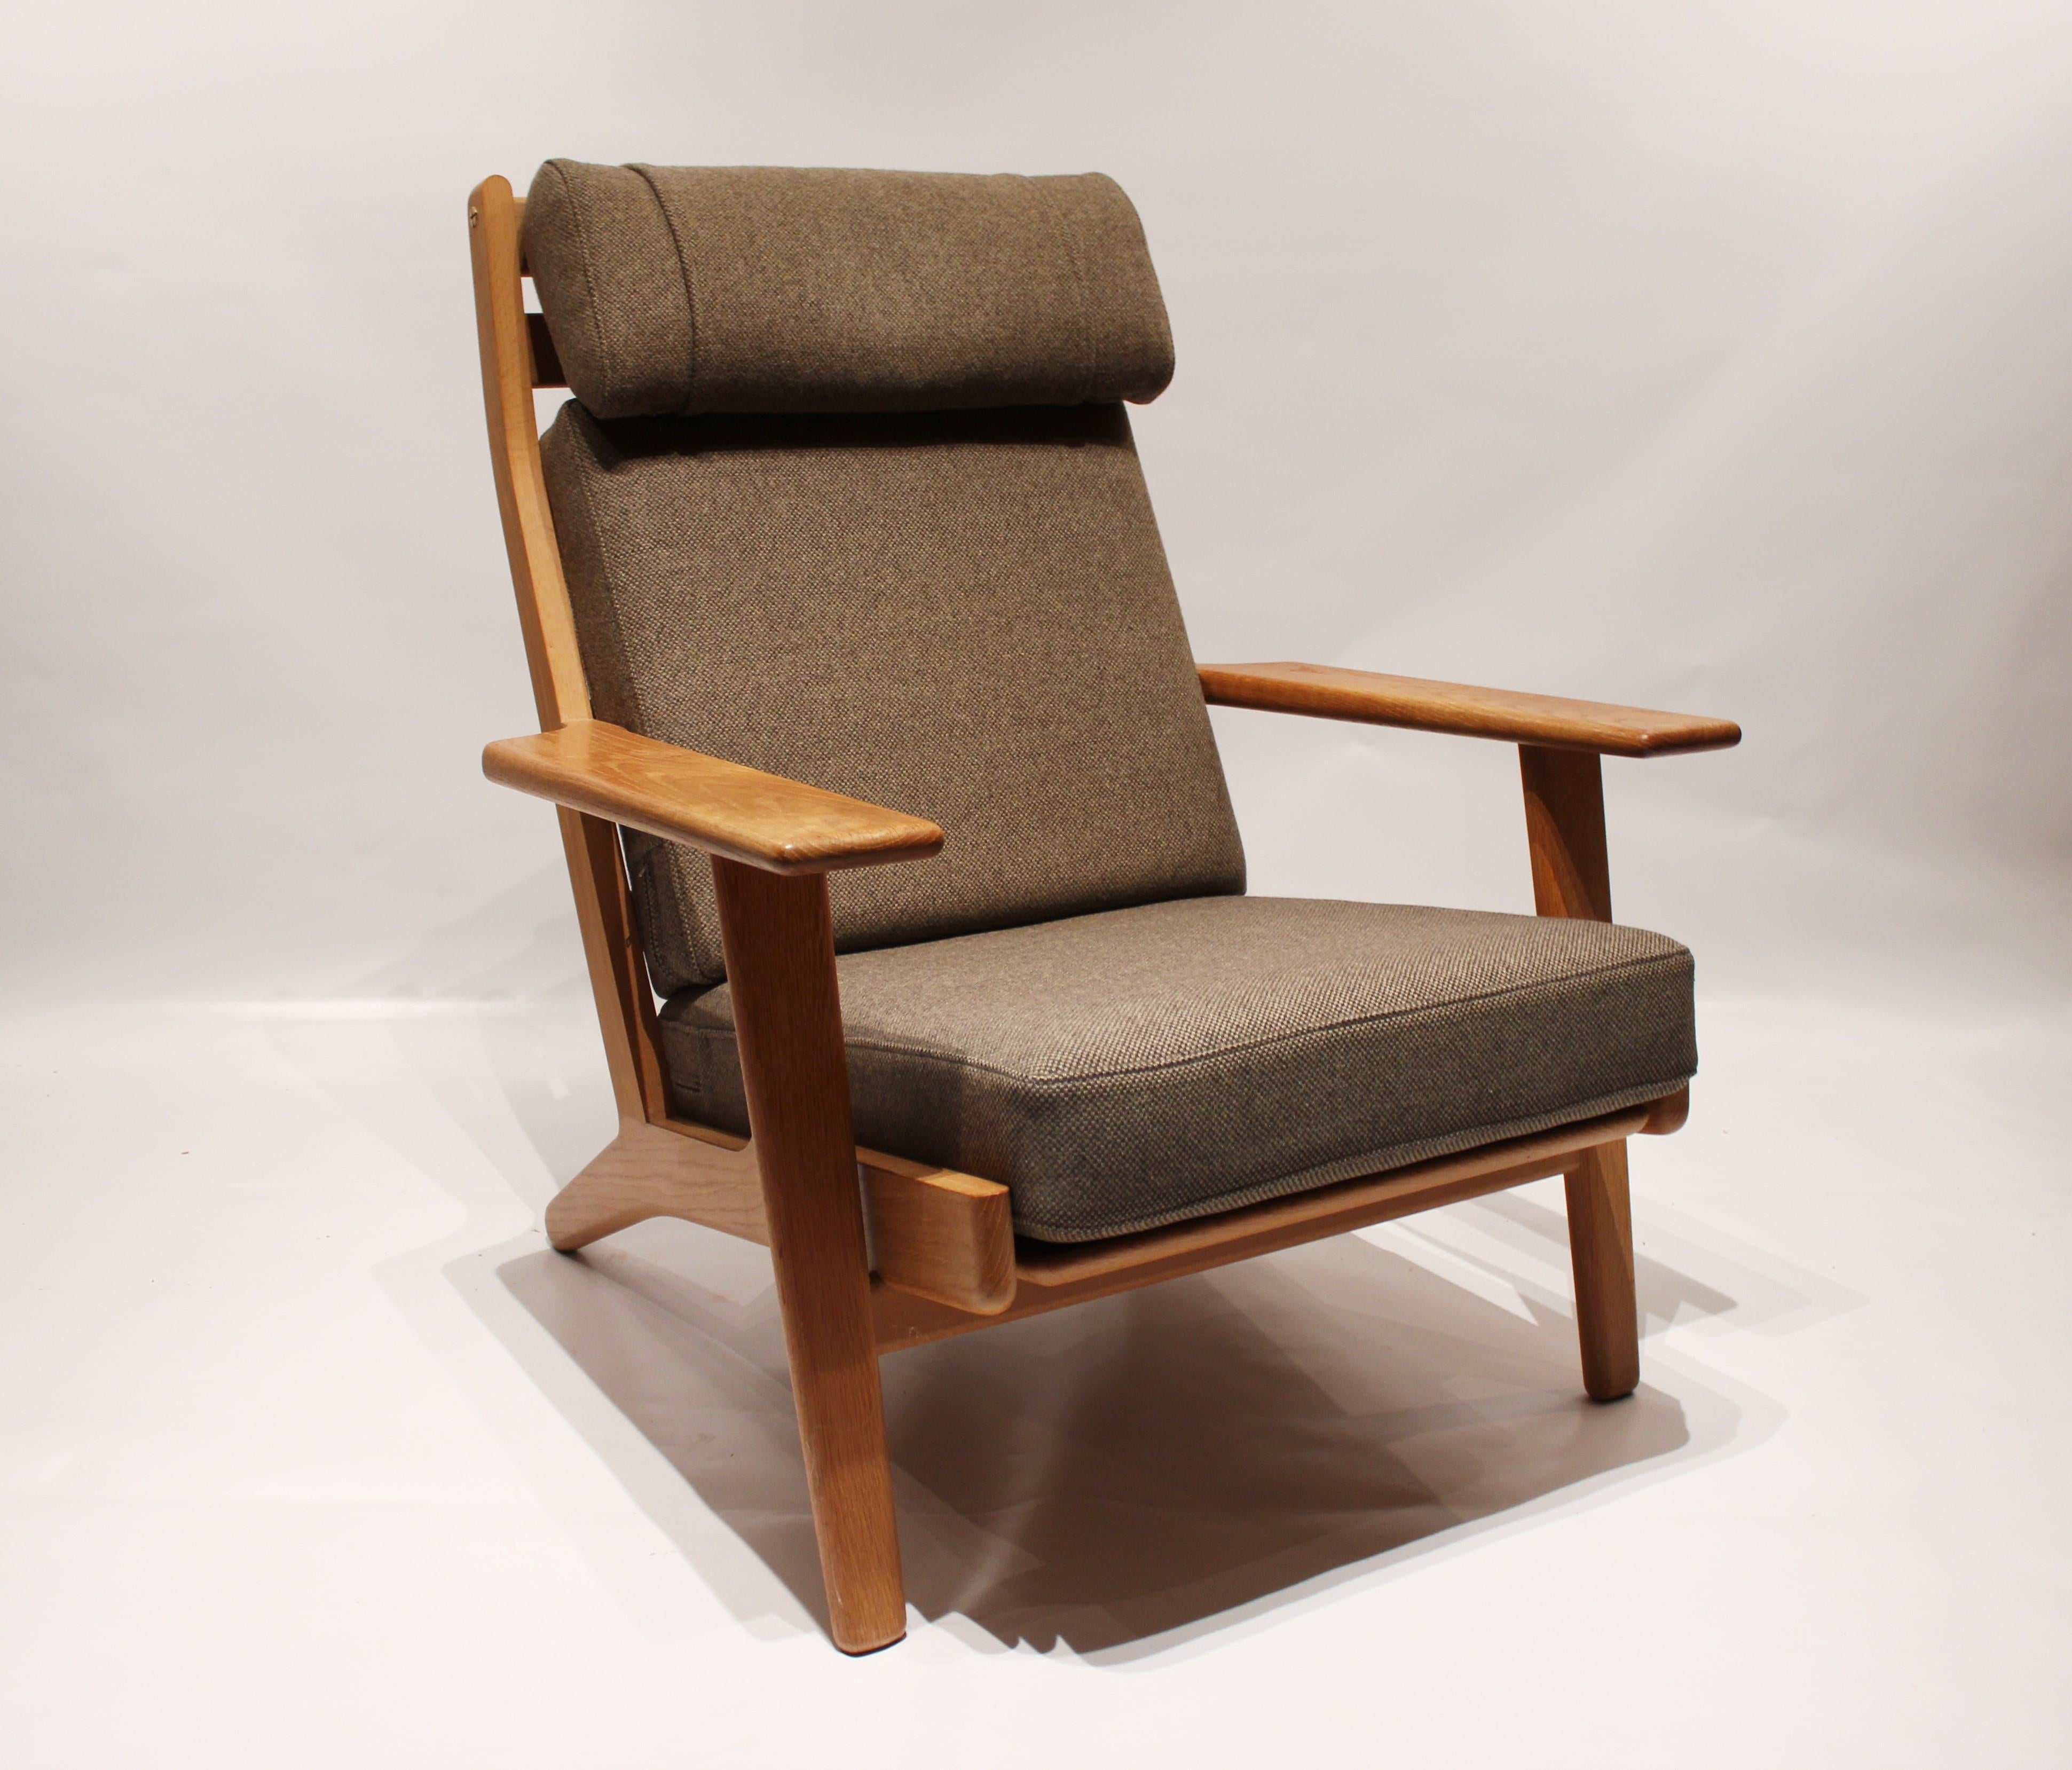 Easy chair, model GE290A, and stool designed by Hans J. Wegner and manufactured by GETAMA in the 1960s. The chair and stool are of soap treated oak and upholstered with dark green Hallingdal wool.
Measures: Stool H 42 cm, W 58 cm and D 52 cm.